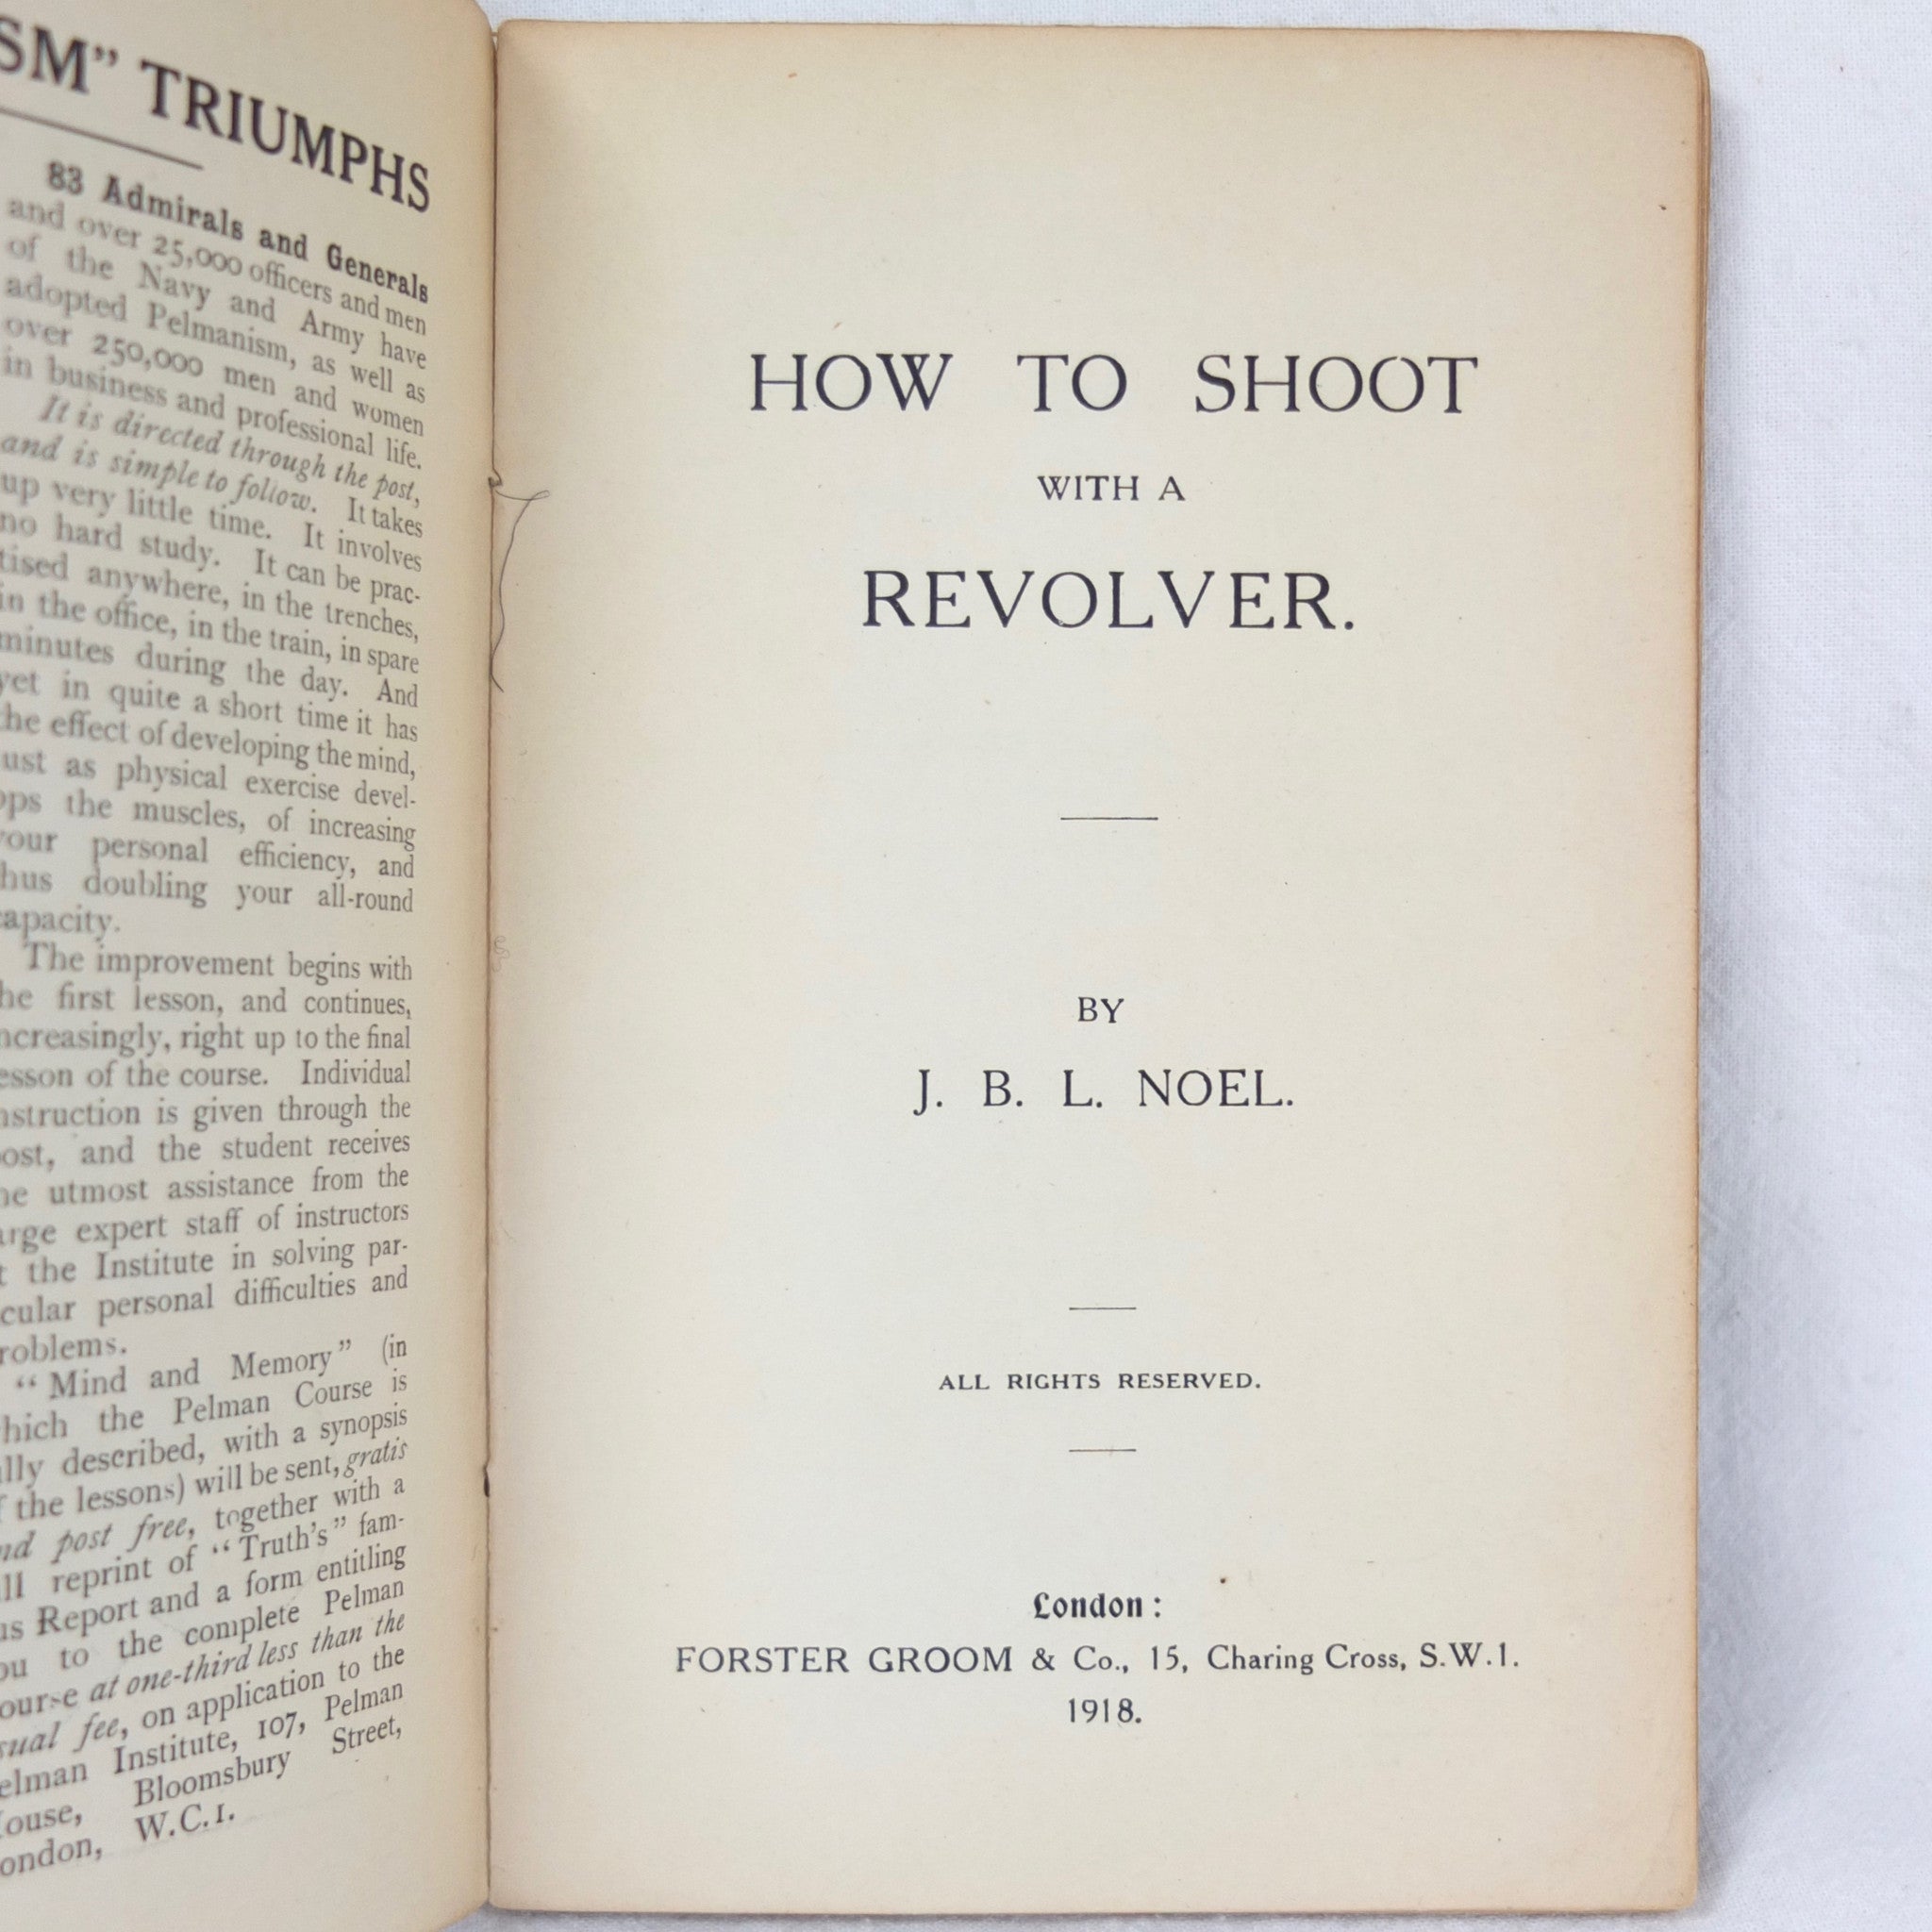 WW1 Manual | How to Shoot with a Revolver (1918) – Compass Library